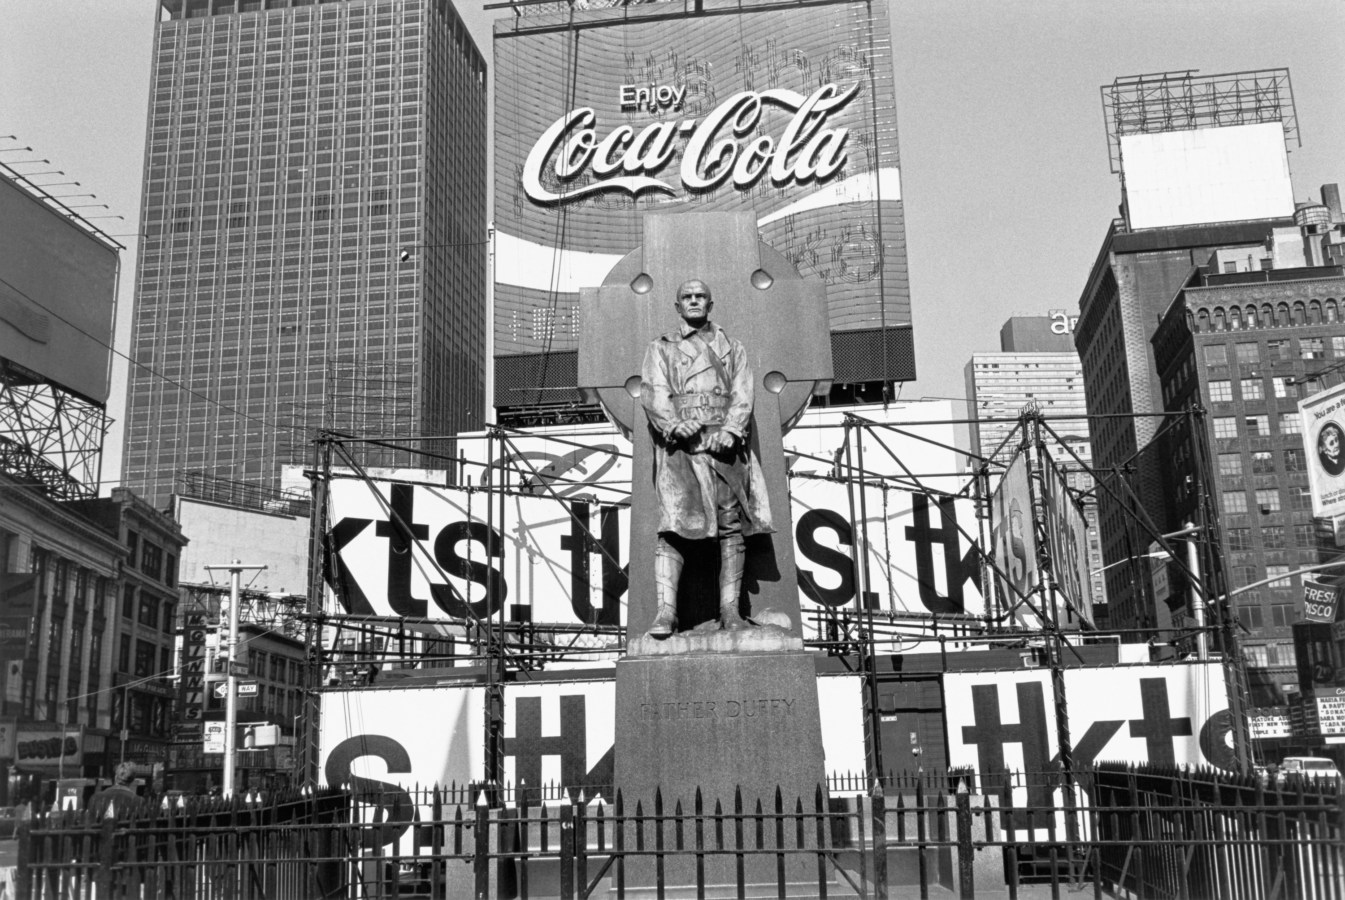 Black-and-white photograph of a statue with a Coca-Cola sign, billboards, and skyscrapers in the background